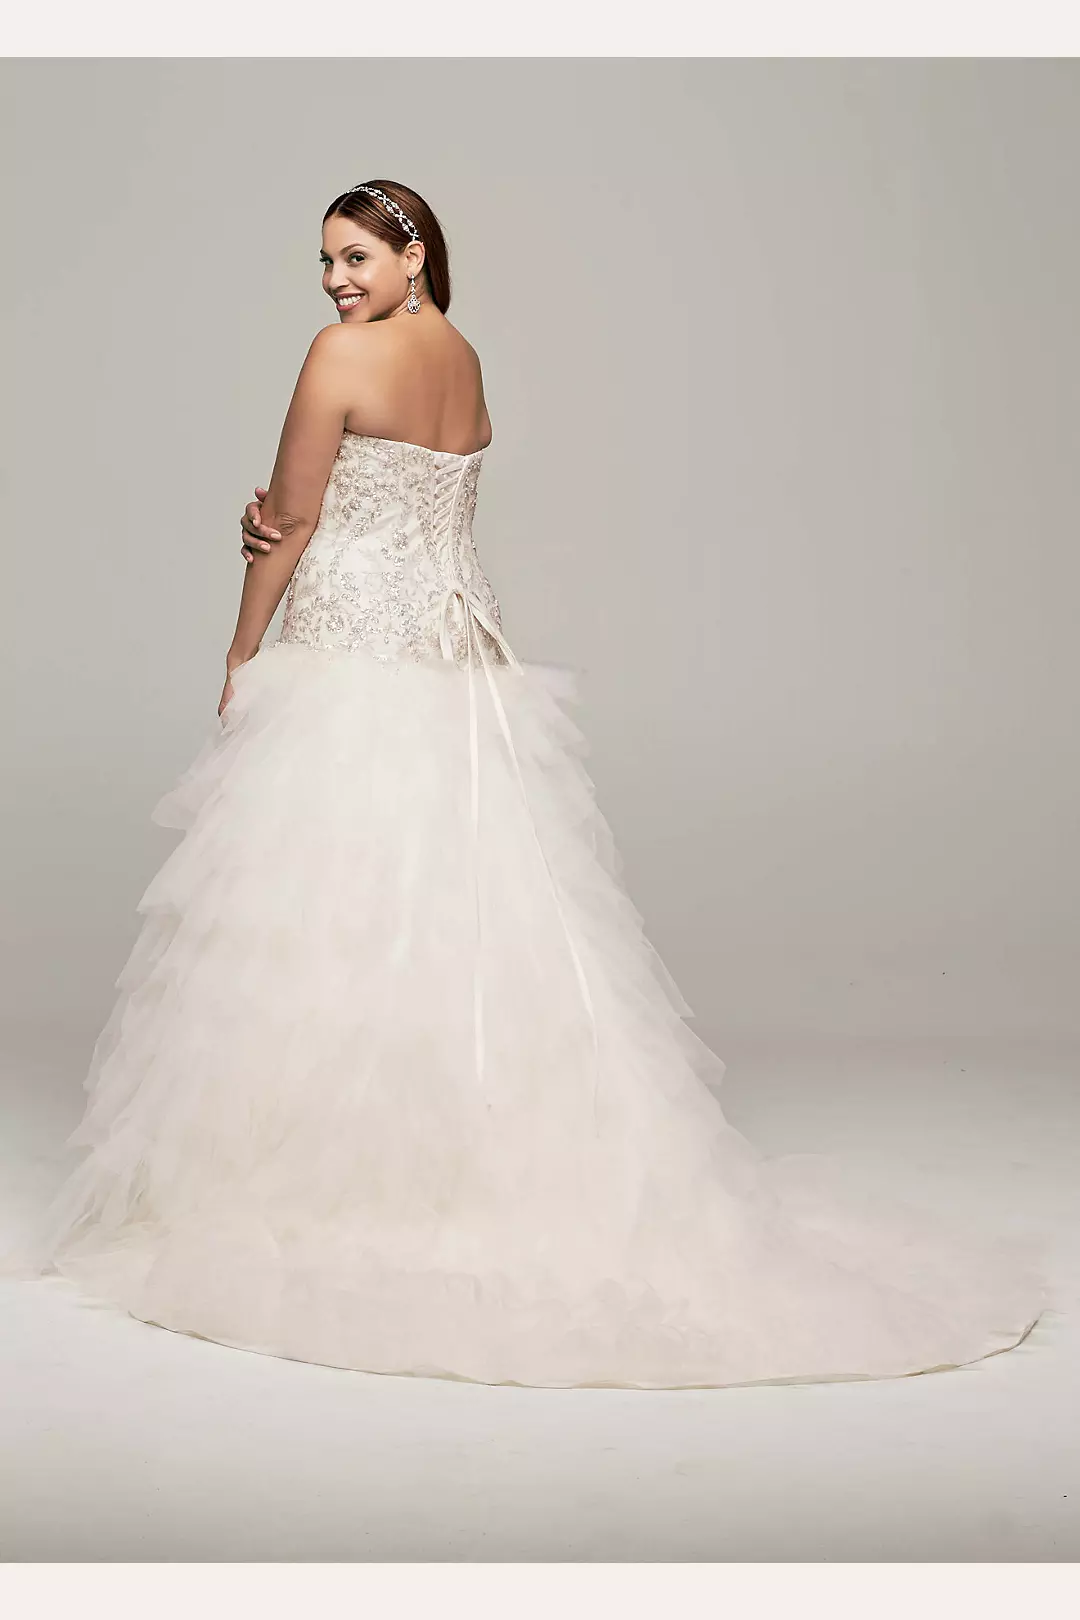 Strapless Tulle Ball Gown with Ruffled Skirt Image 2